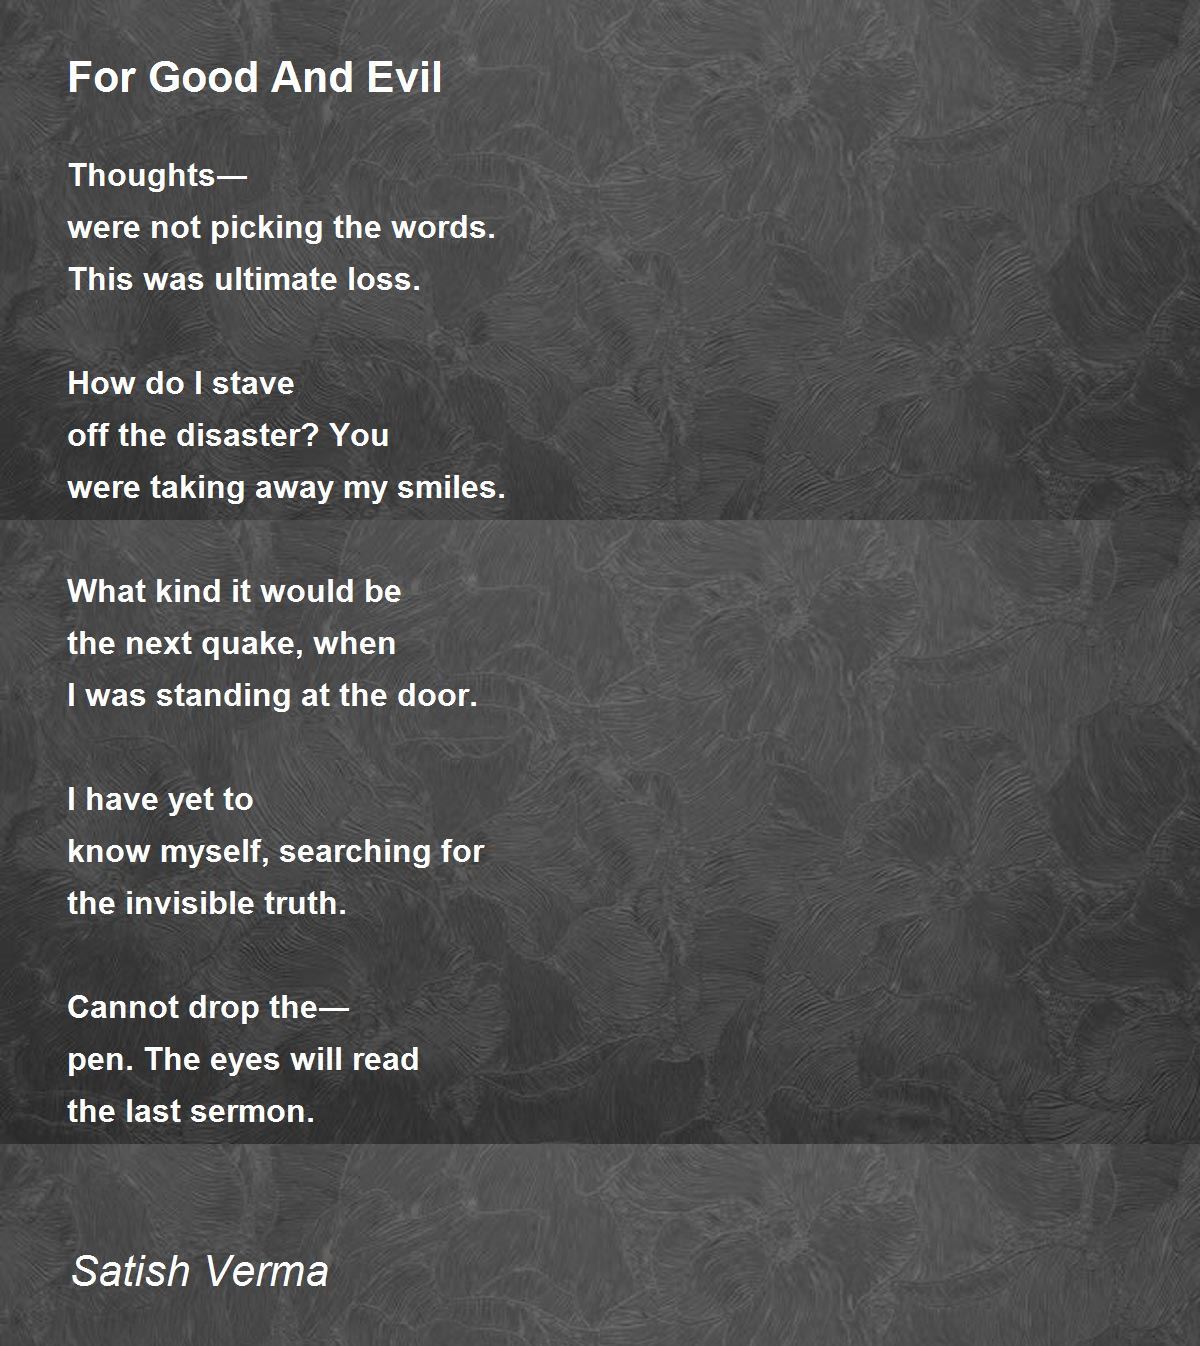 For Good And Evil Poem By Satish Verma